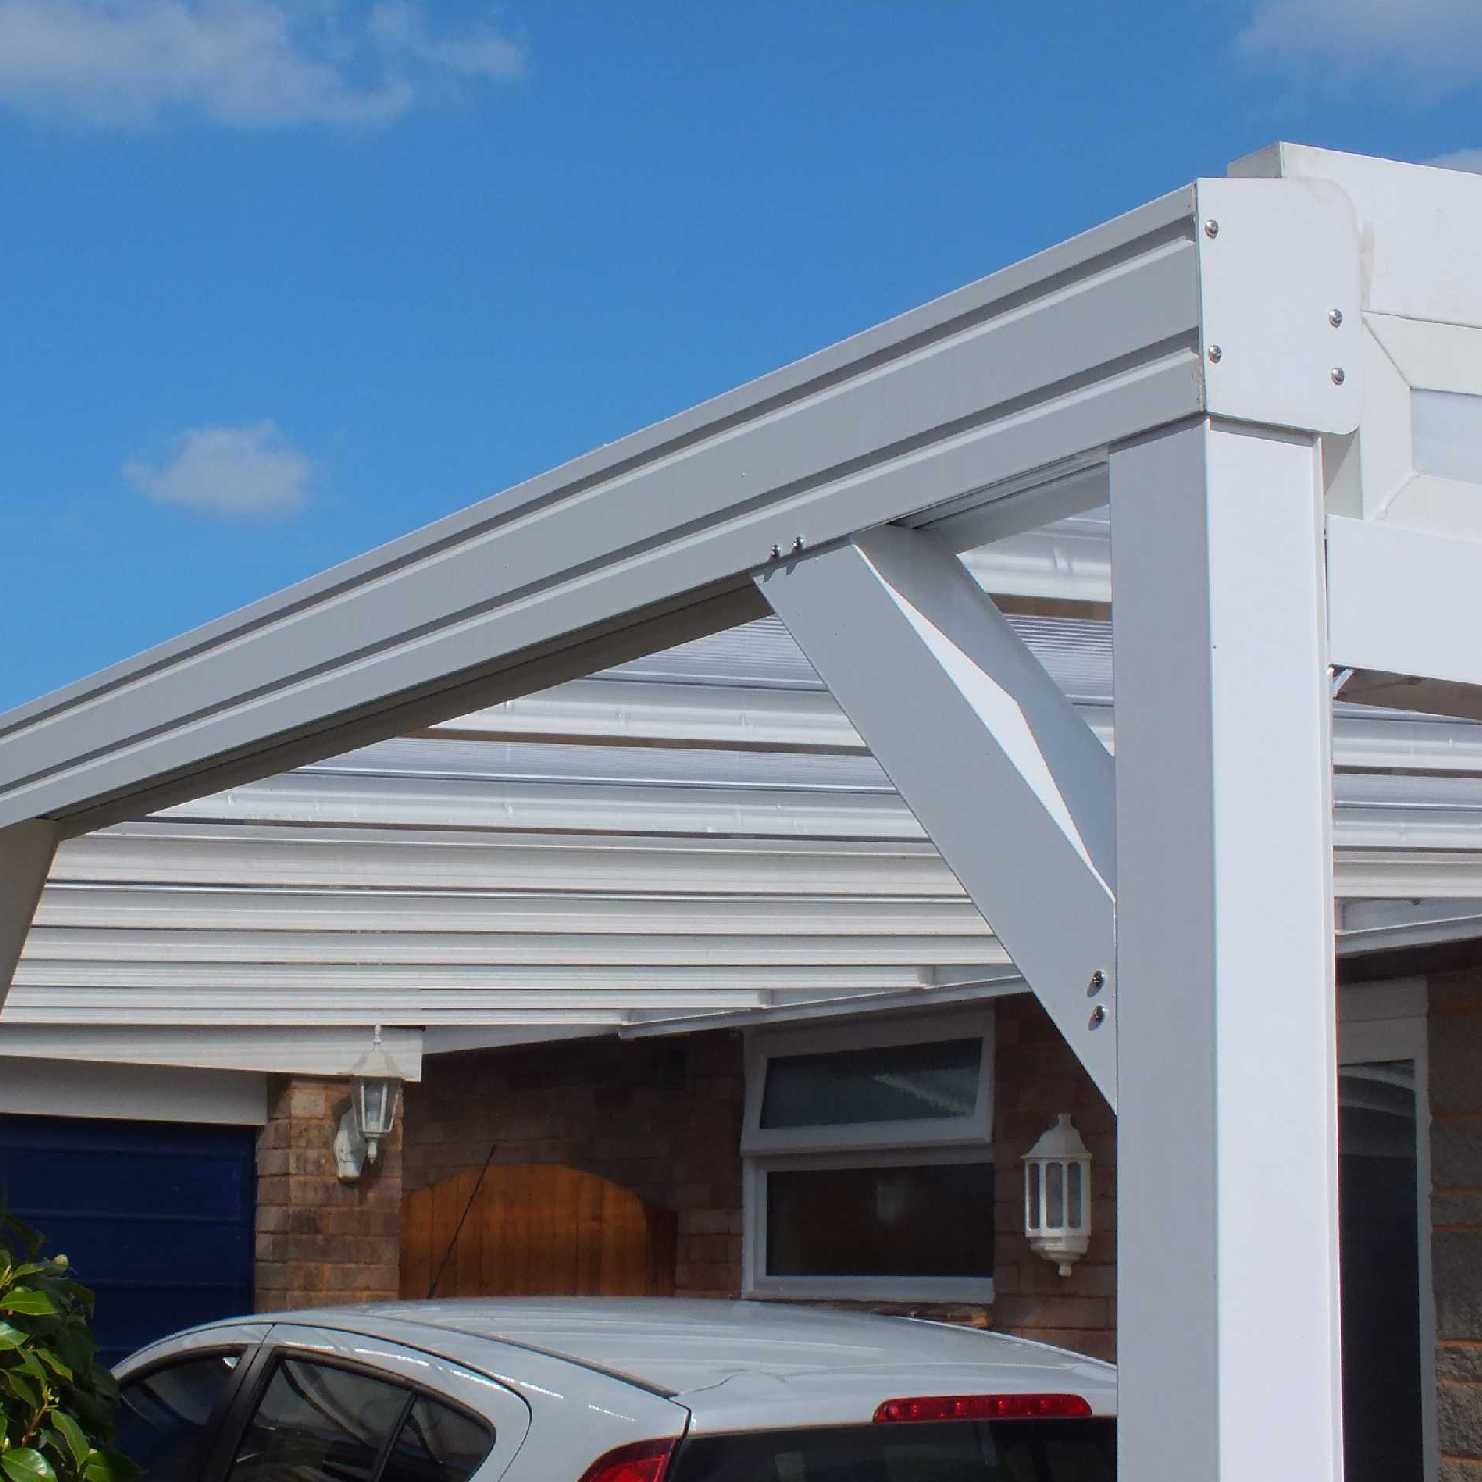 Buy Omega Smart Lean-To Canopy, White with 16mm Polycarbonate Glazing - 10.6m (W) x 3.5m (P), (5) Supporting Posts online today